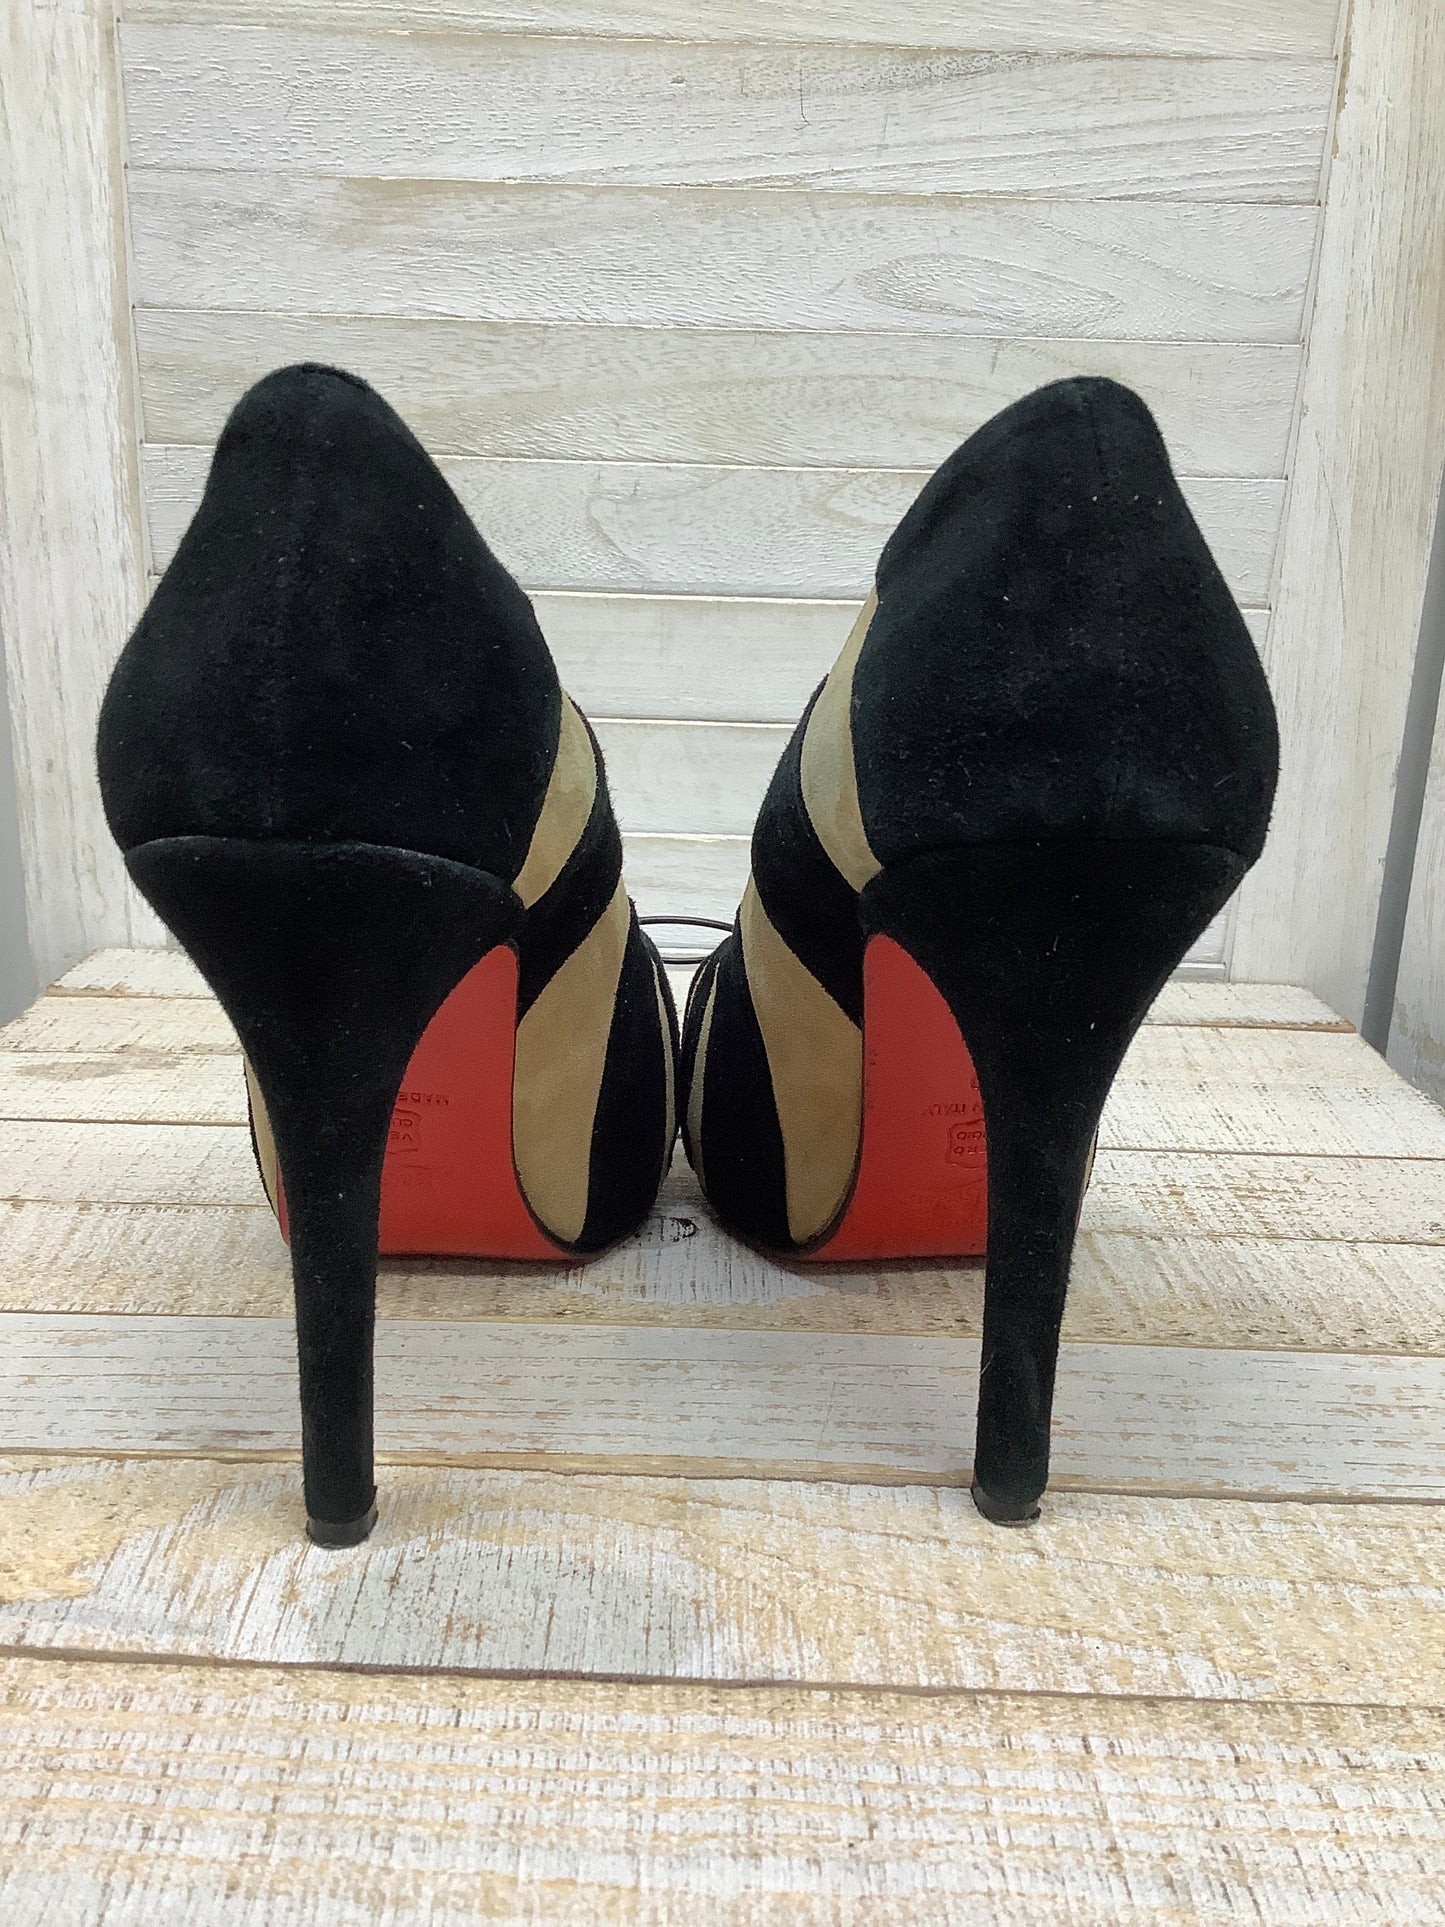 Shoes Heels Platform By Christian Louboutin  Size: 10